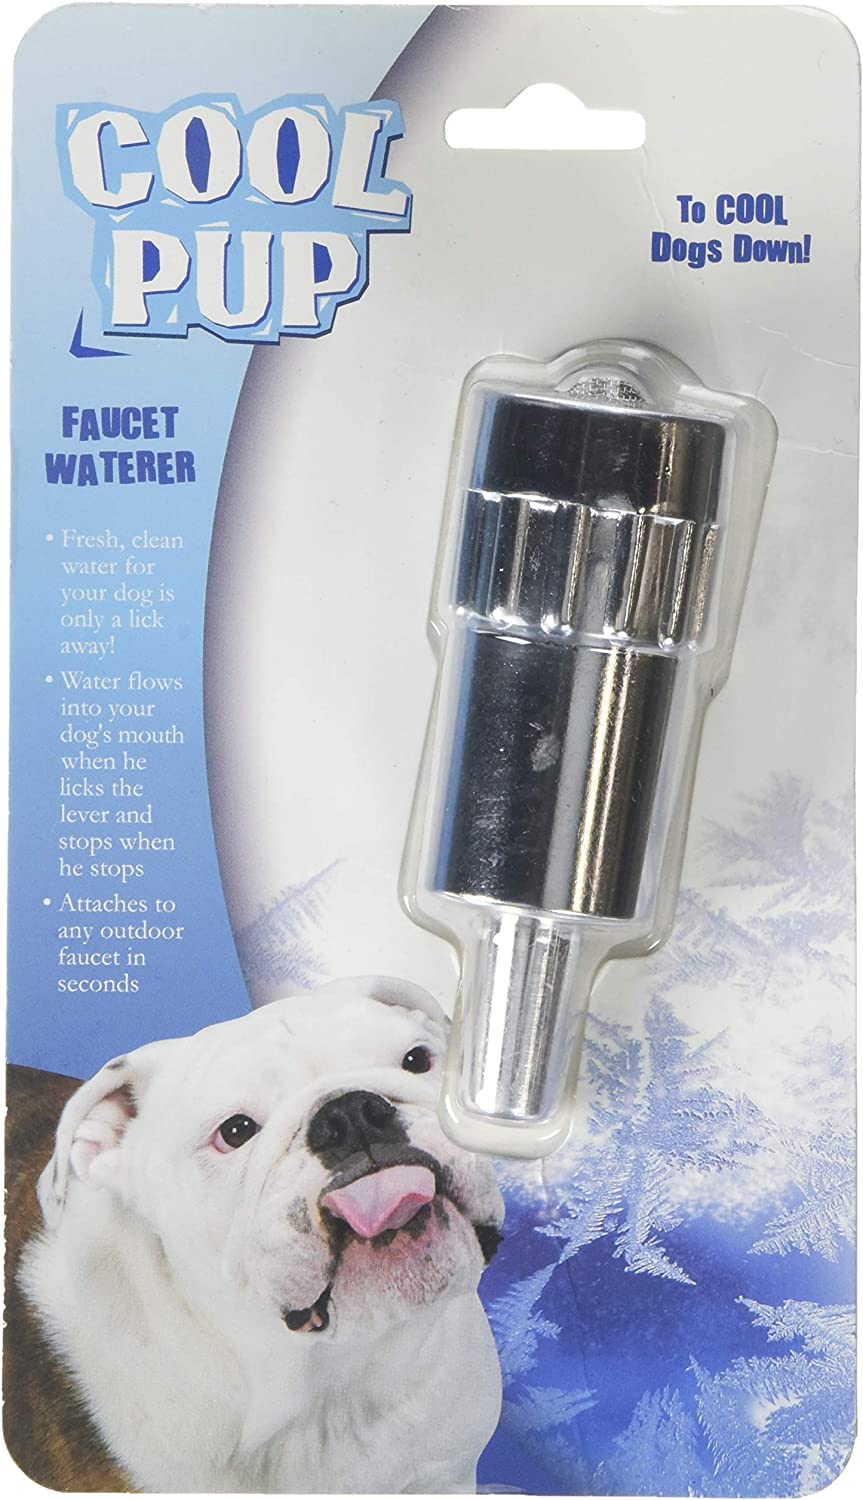 Cool Pup√É¬¢√¢‚Ç¨≈æ√Ç¬¢ Faucet Waterers√É¬¢√¢‚Äö¬¨√¢‚Ç¨¬ùUnique and Innovative Outdoor Faucet Attachments That Make It Easy to Offer Dogs Cool, Fresh Water Even When They&#39;re Outside Alone